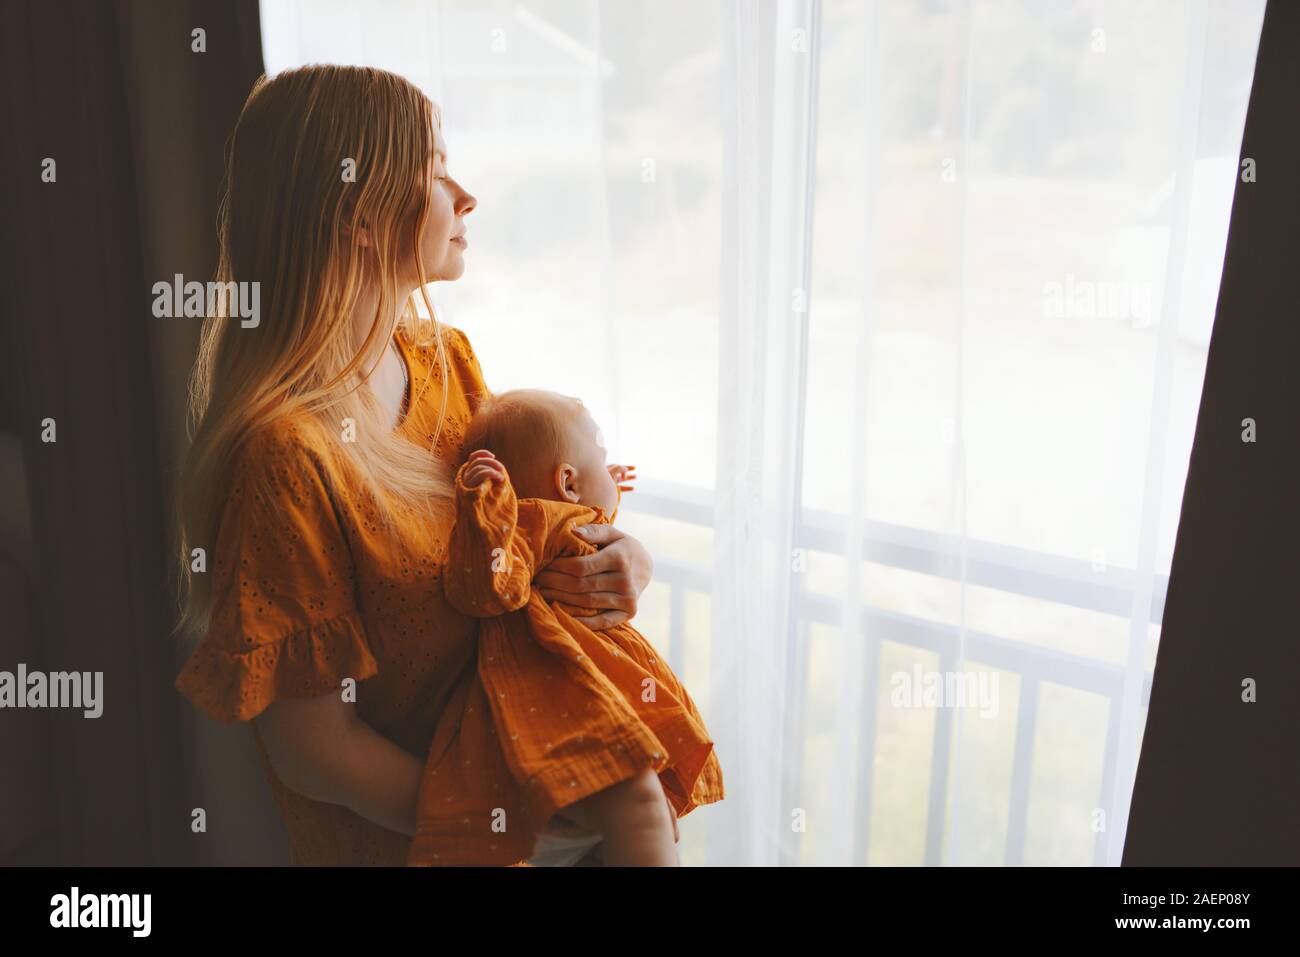 Mother and daughter baby at home family lifestyle mom and child together looking out window maternity concept Mothers day holiday dress clothing Stock Photo